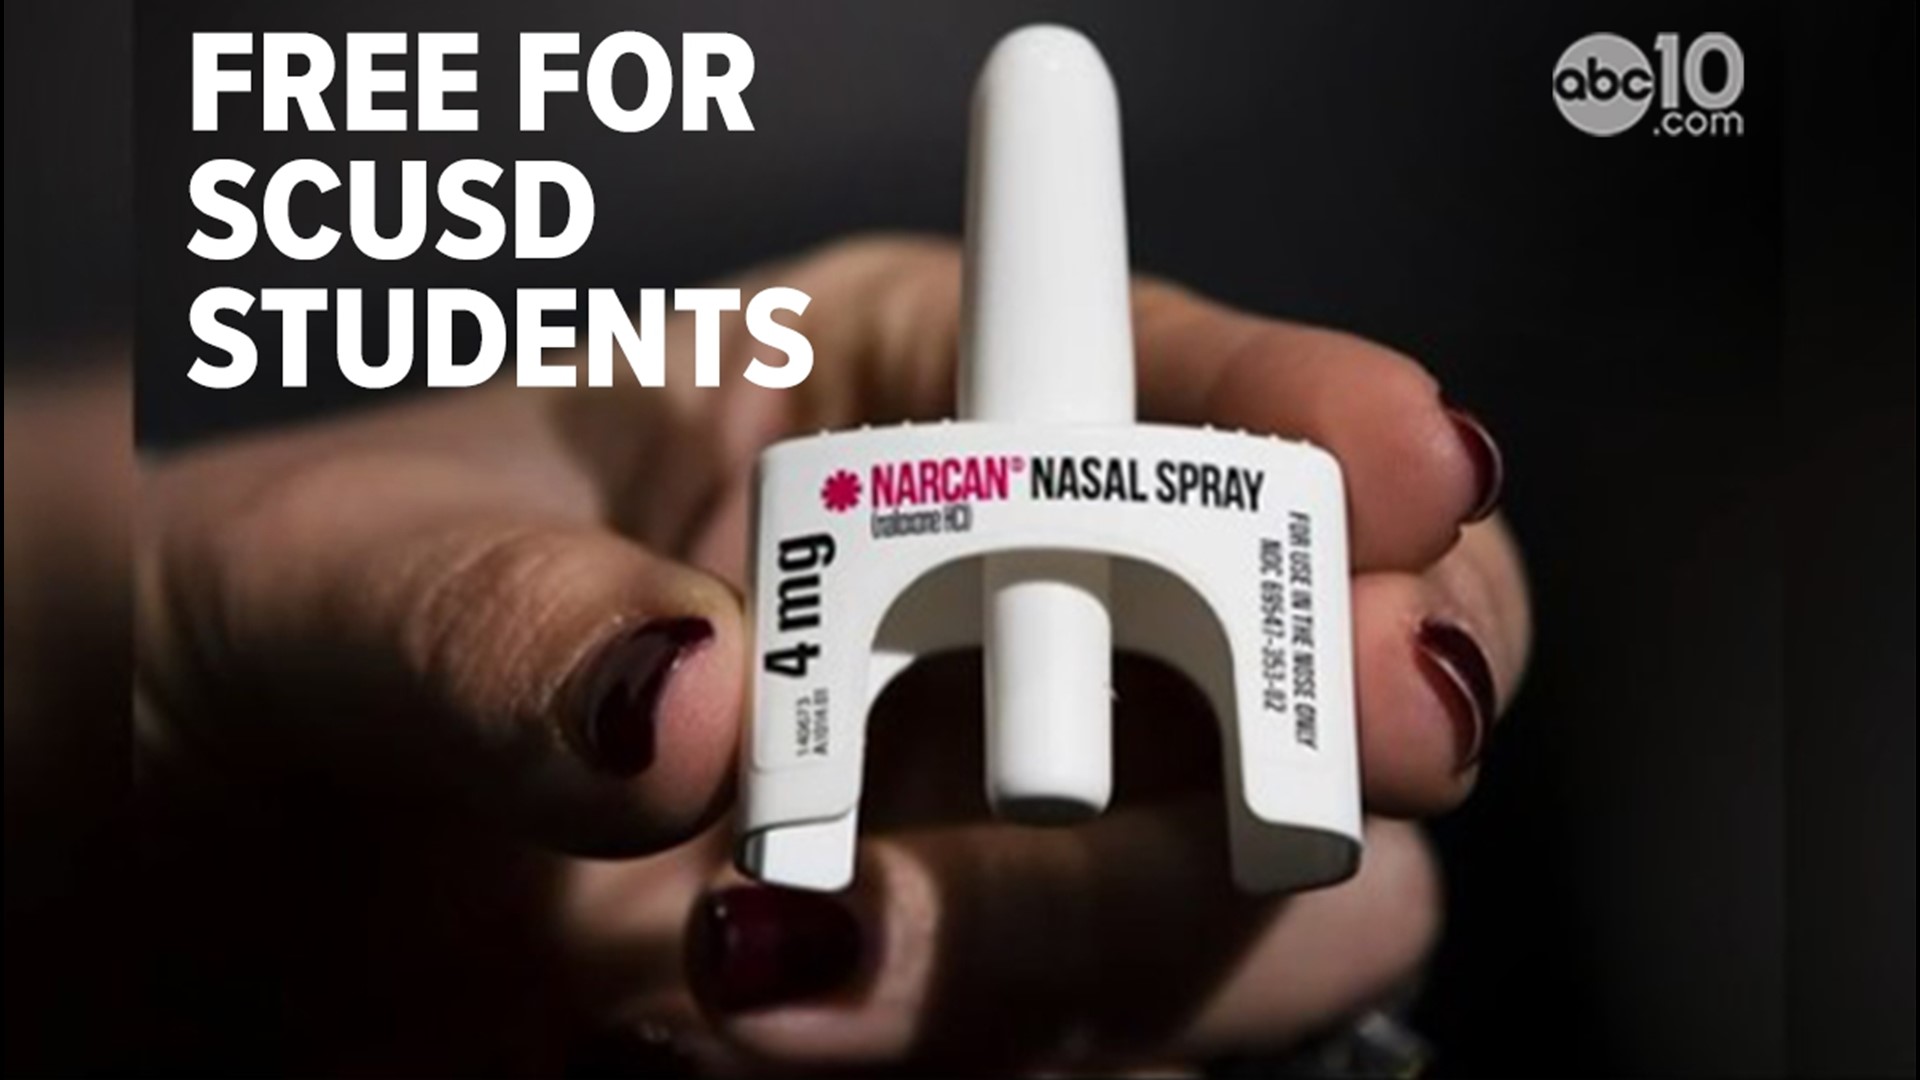 Every Sacramento City Unified School District campus will be making Narcan, a product that can reverse opioid overdose, available to students for free.